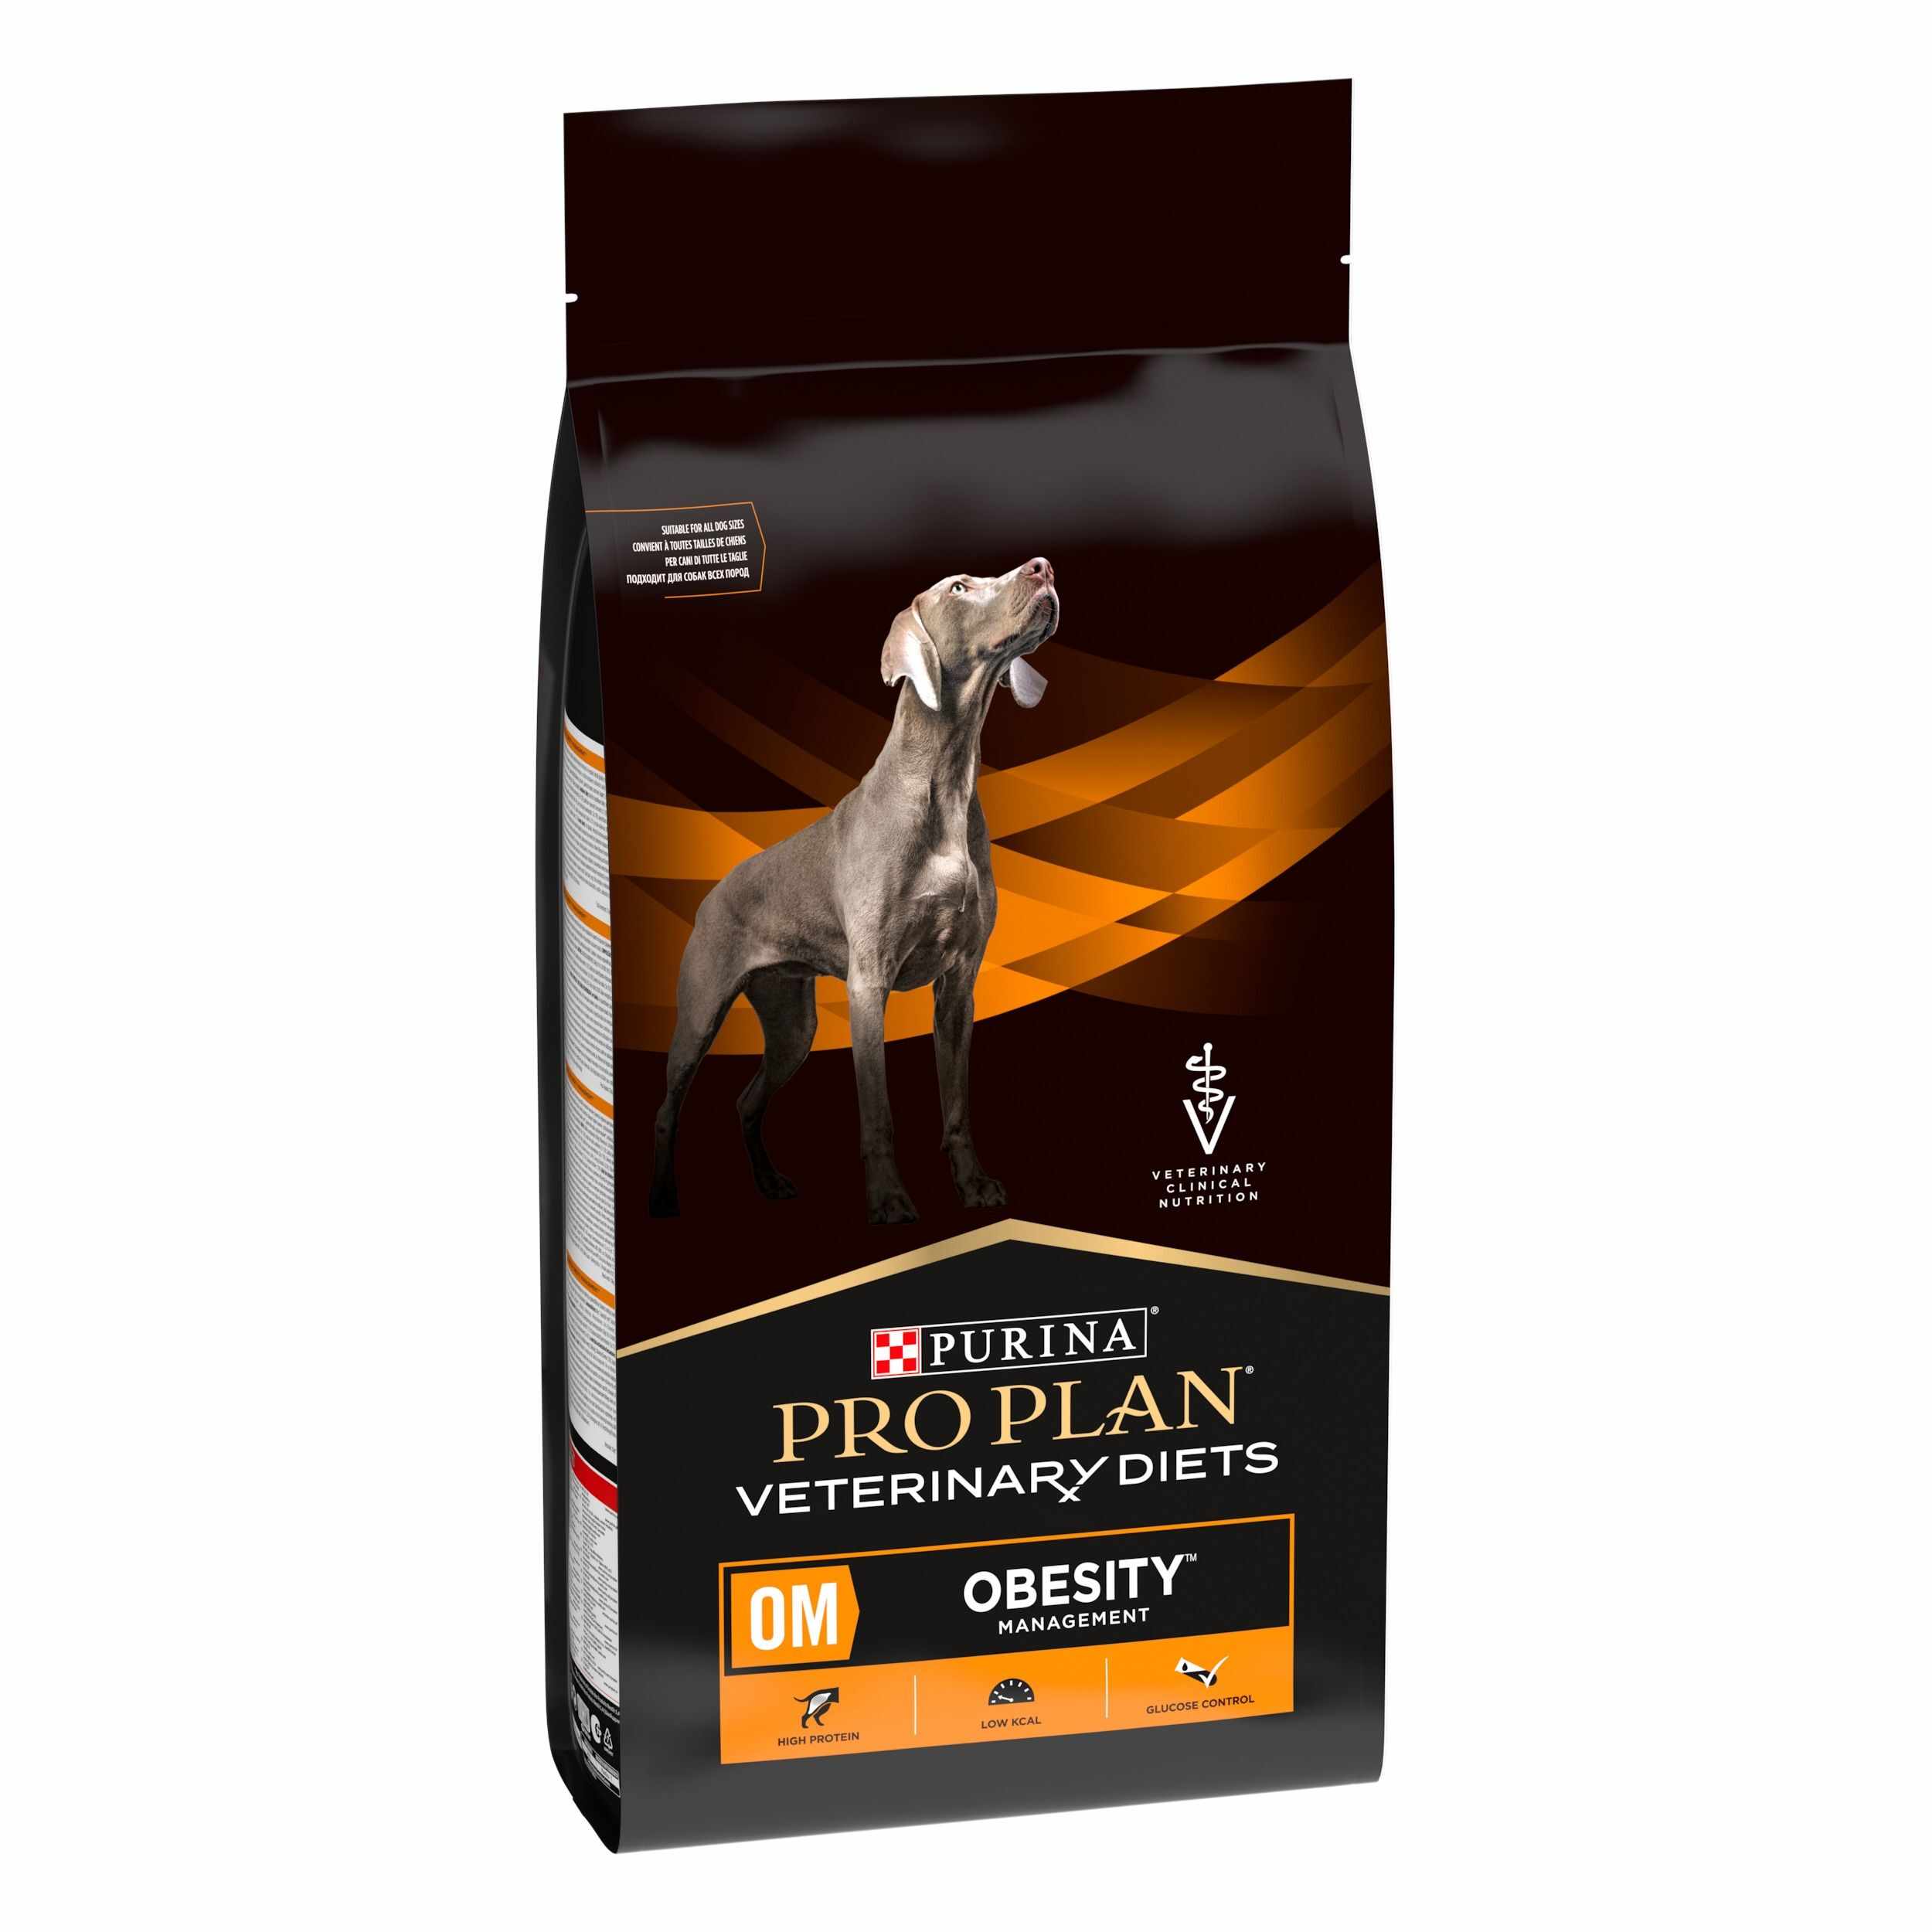 Purina Veterinary Diets Canine OM, Obesity Management, 12 kg